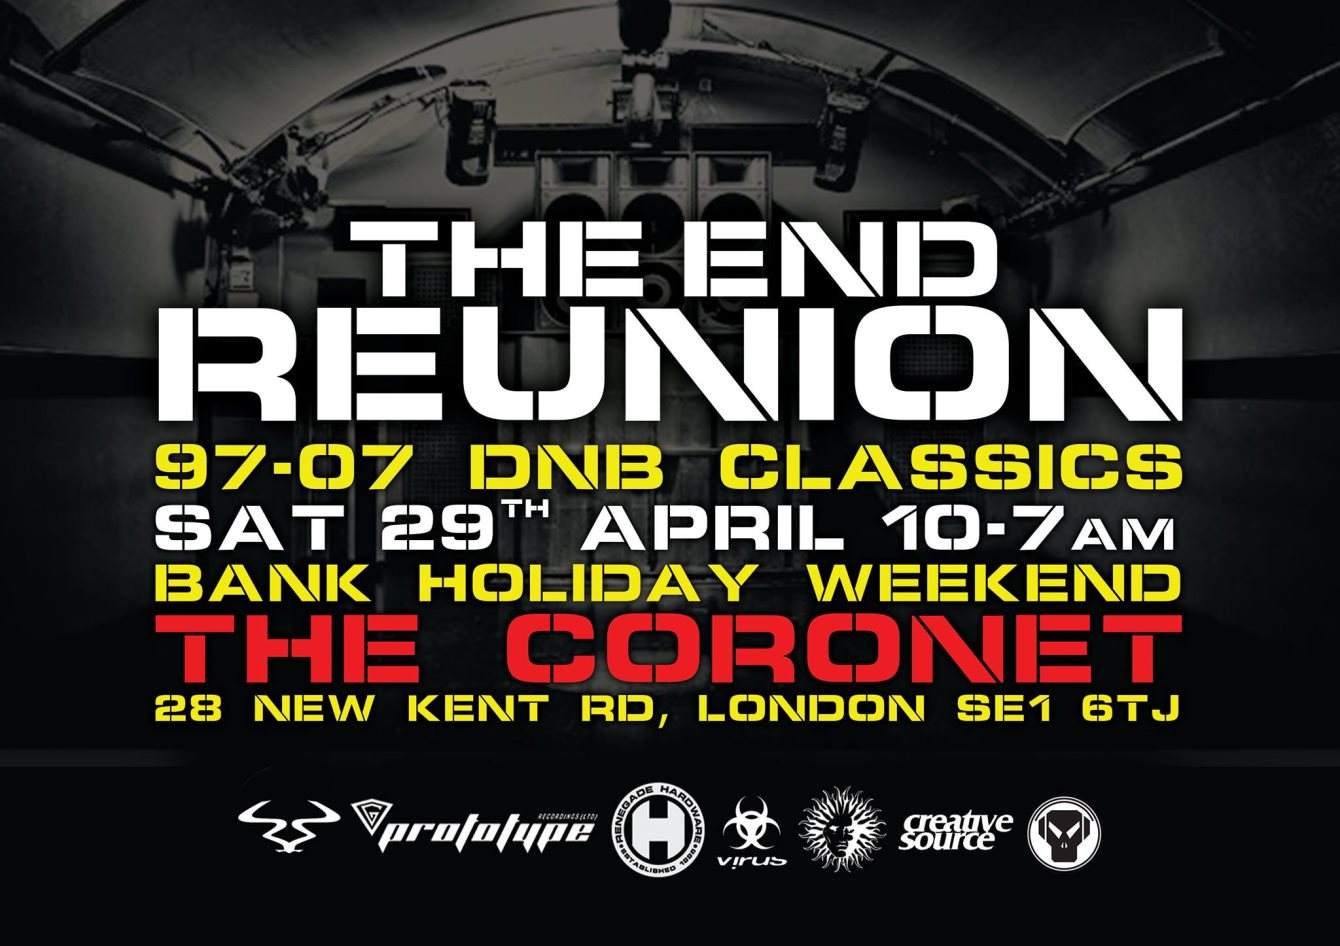 The End Reunion - フライヤー表